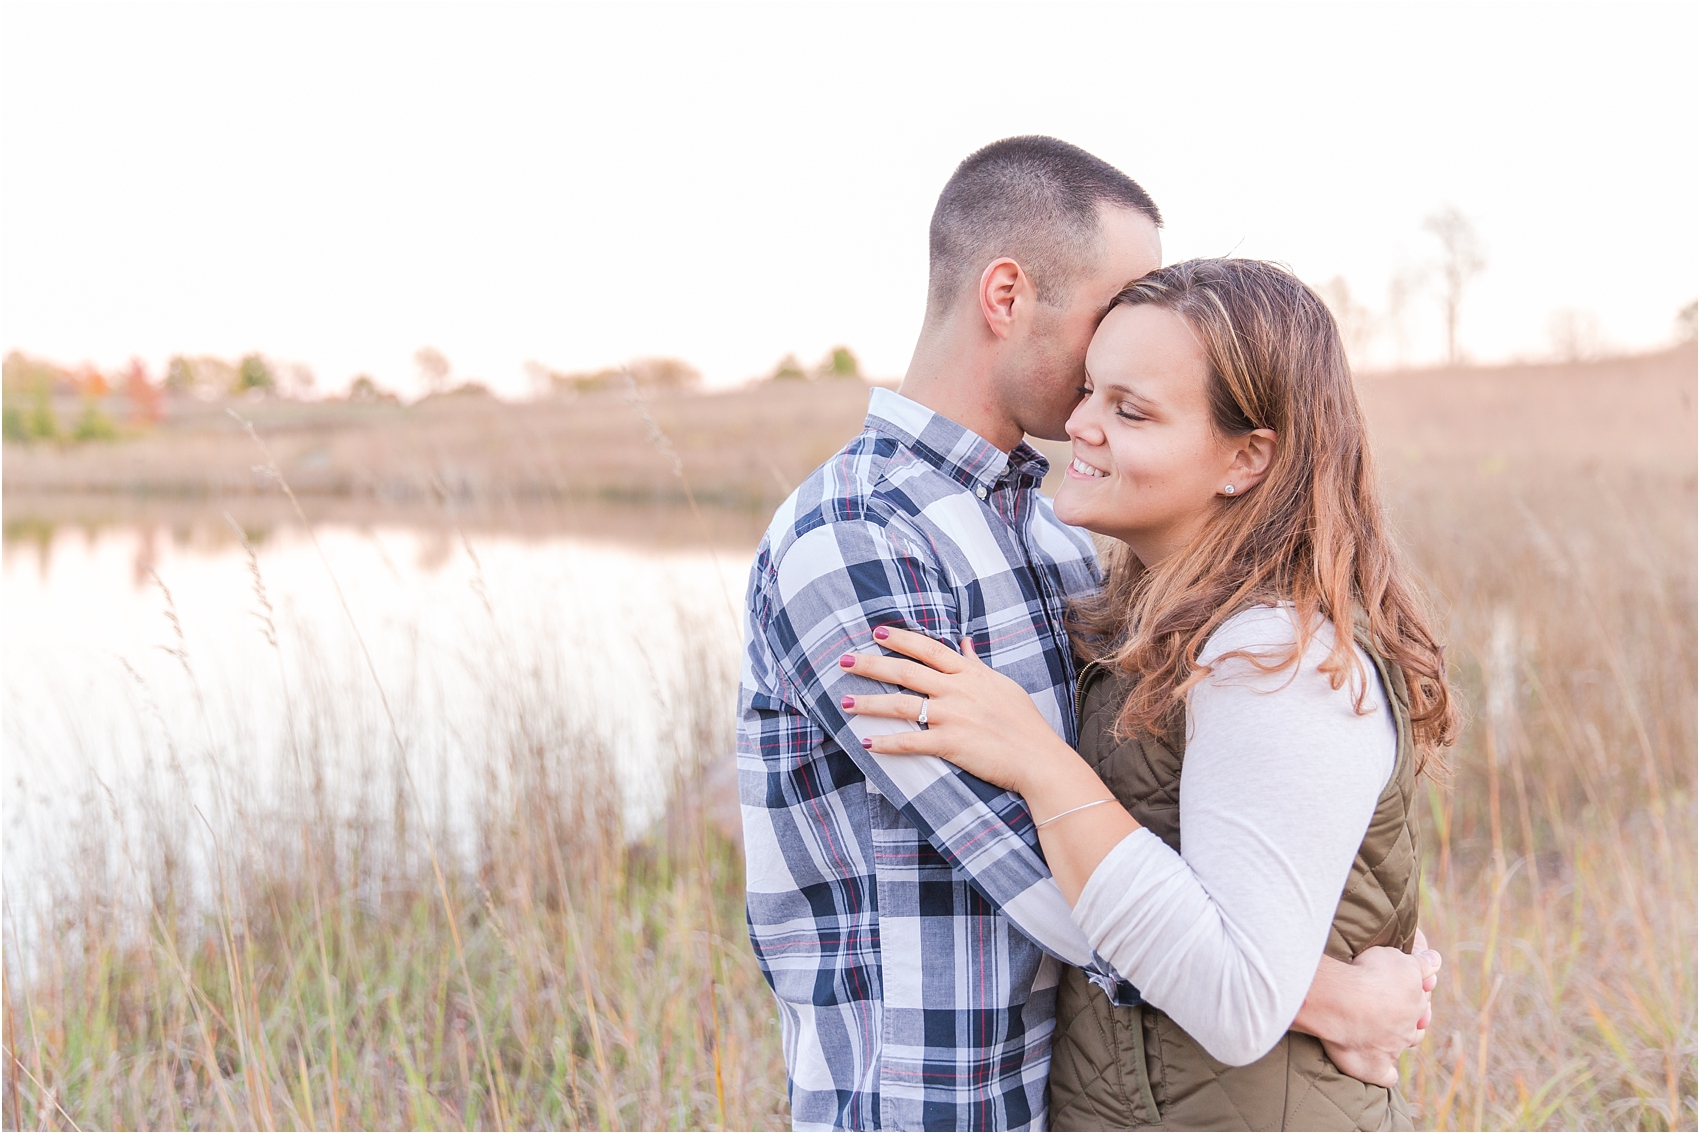 romantic-fall-engagement-photos-at-indian-springs-metropark-in-clarkston-mi-by-courtney-carolyn-photography_0001.jpg